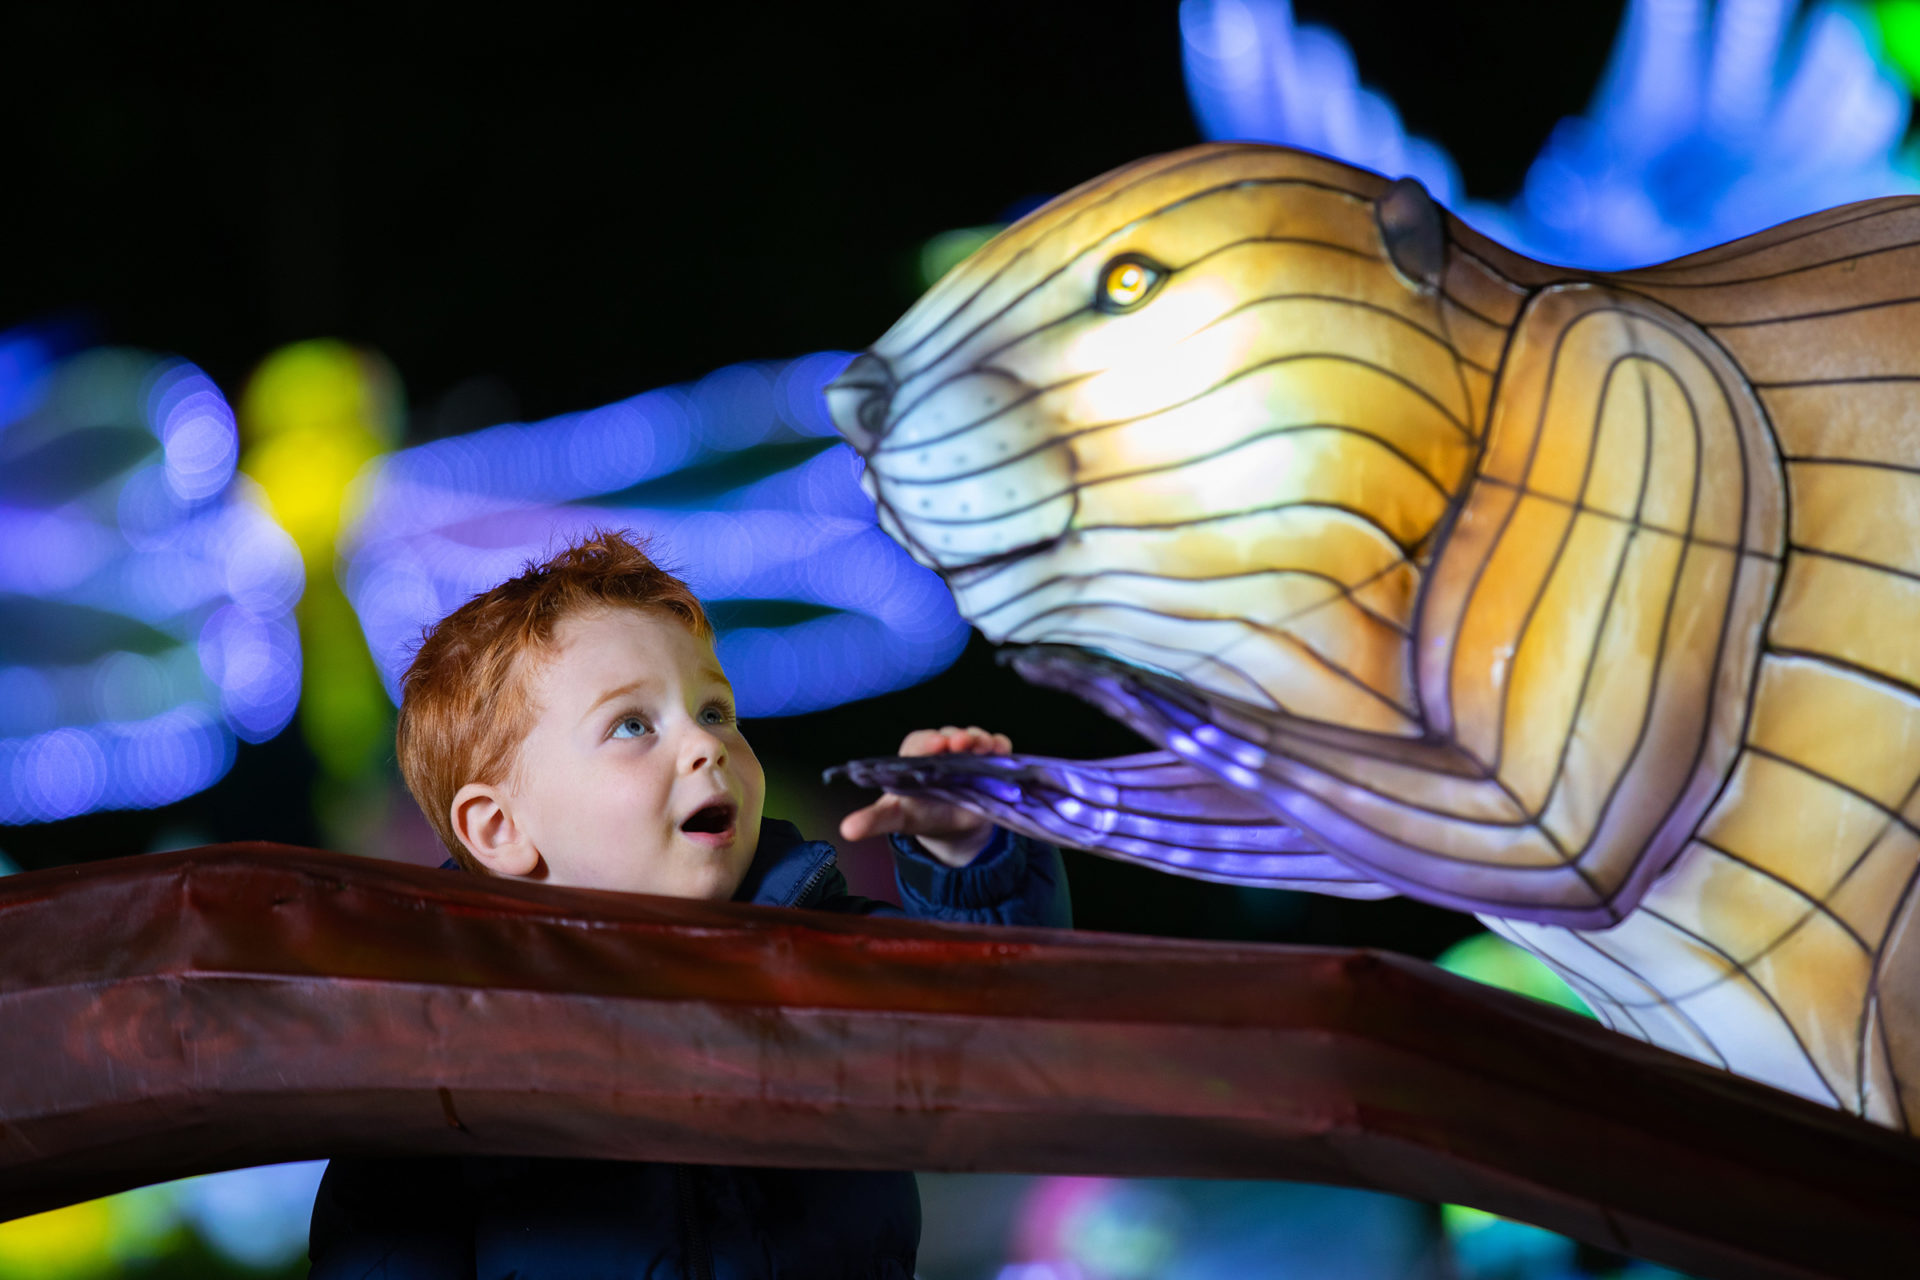 Wild Lights At Dublin Zoo Returns With A Brand New Theme ‘The Magic Of Life’ SPIN1038